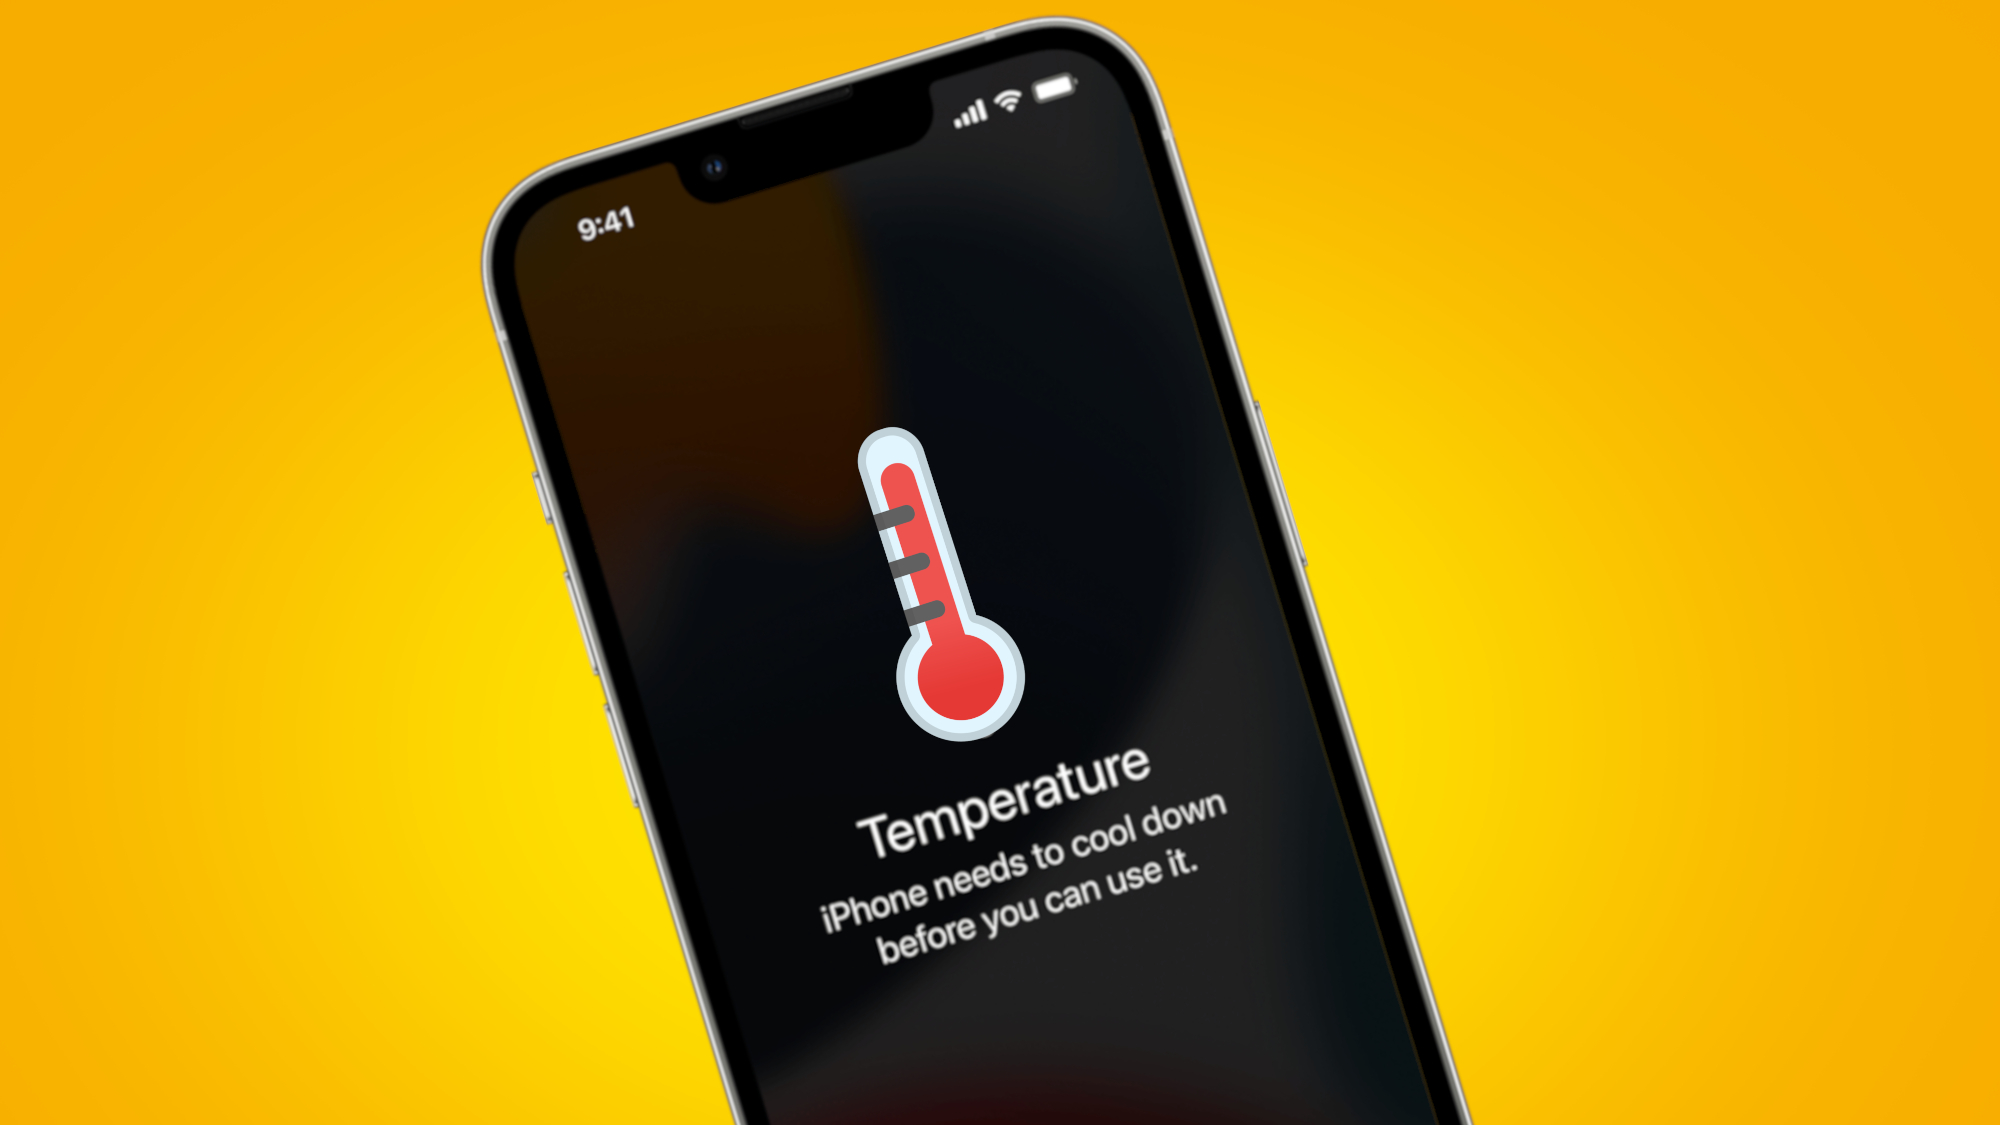 Iphone Overheating These Are The Best And Worst Ways To Cool It Down